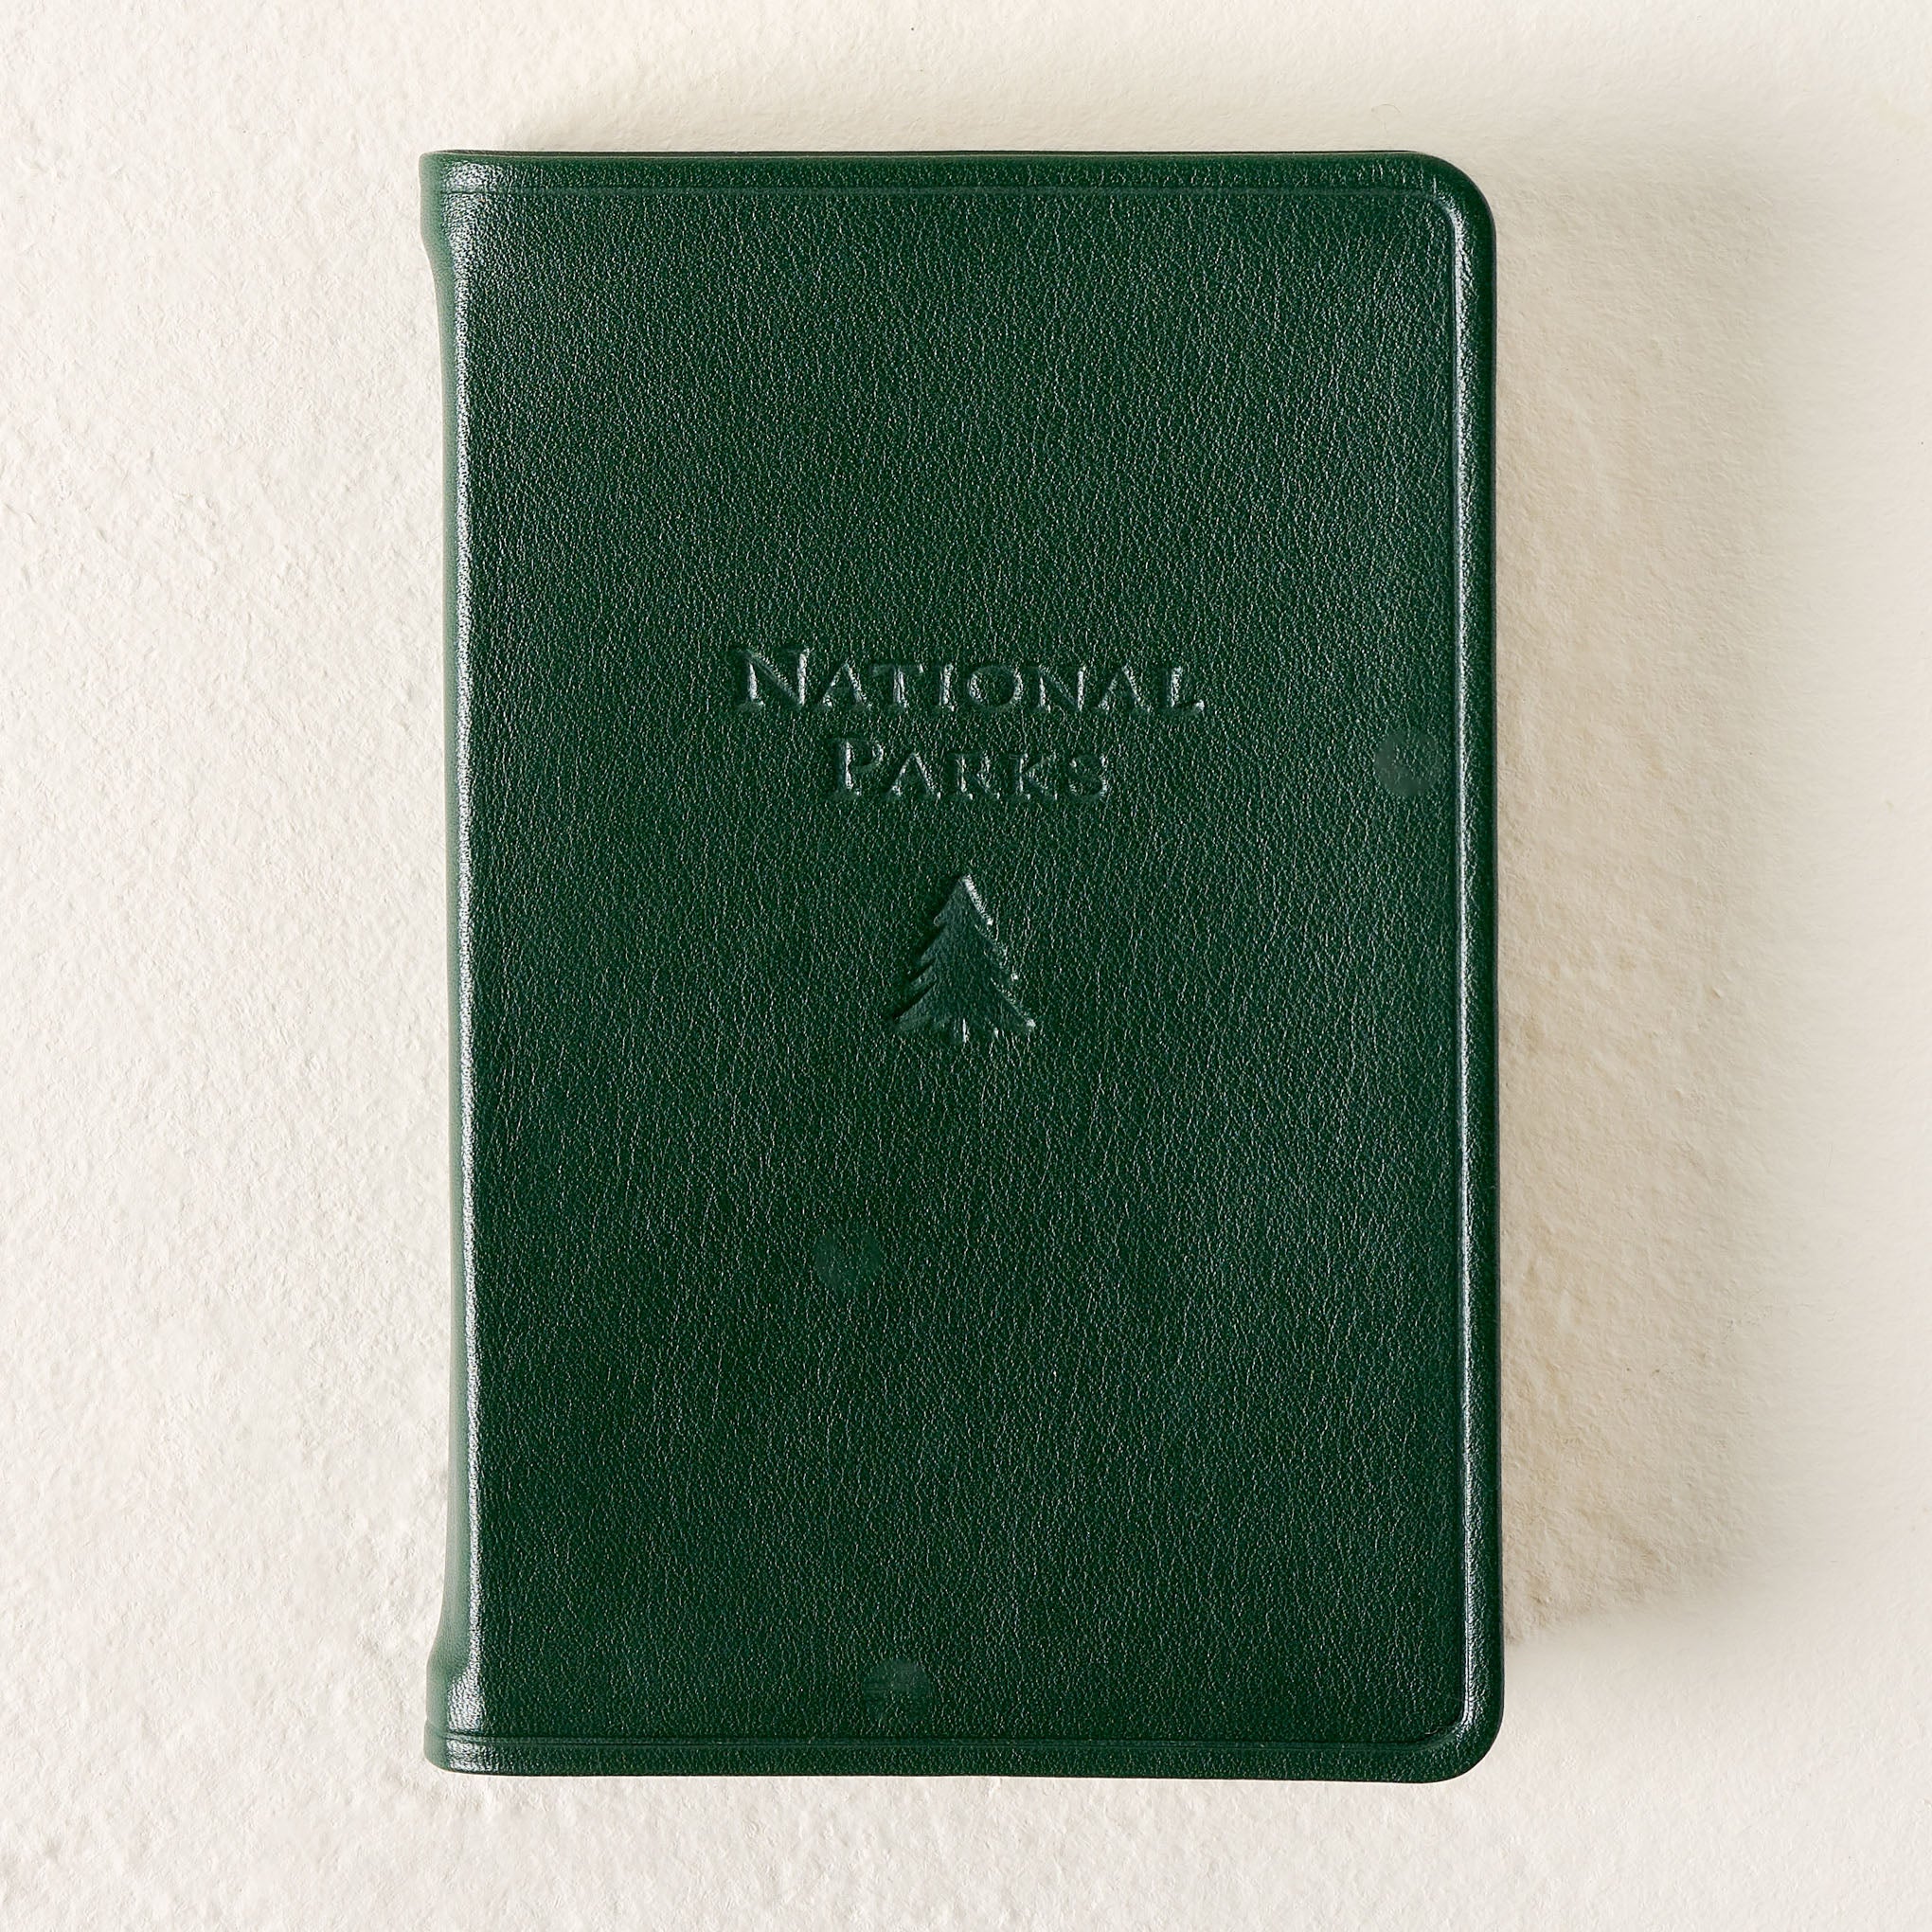 Green National Parks Guide $50.00